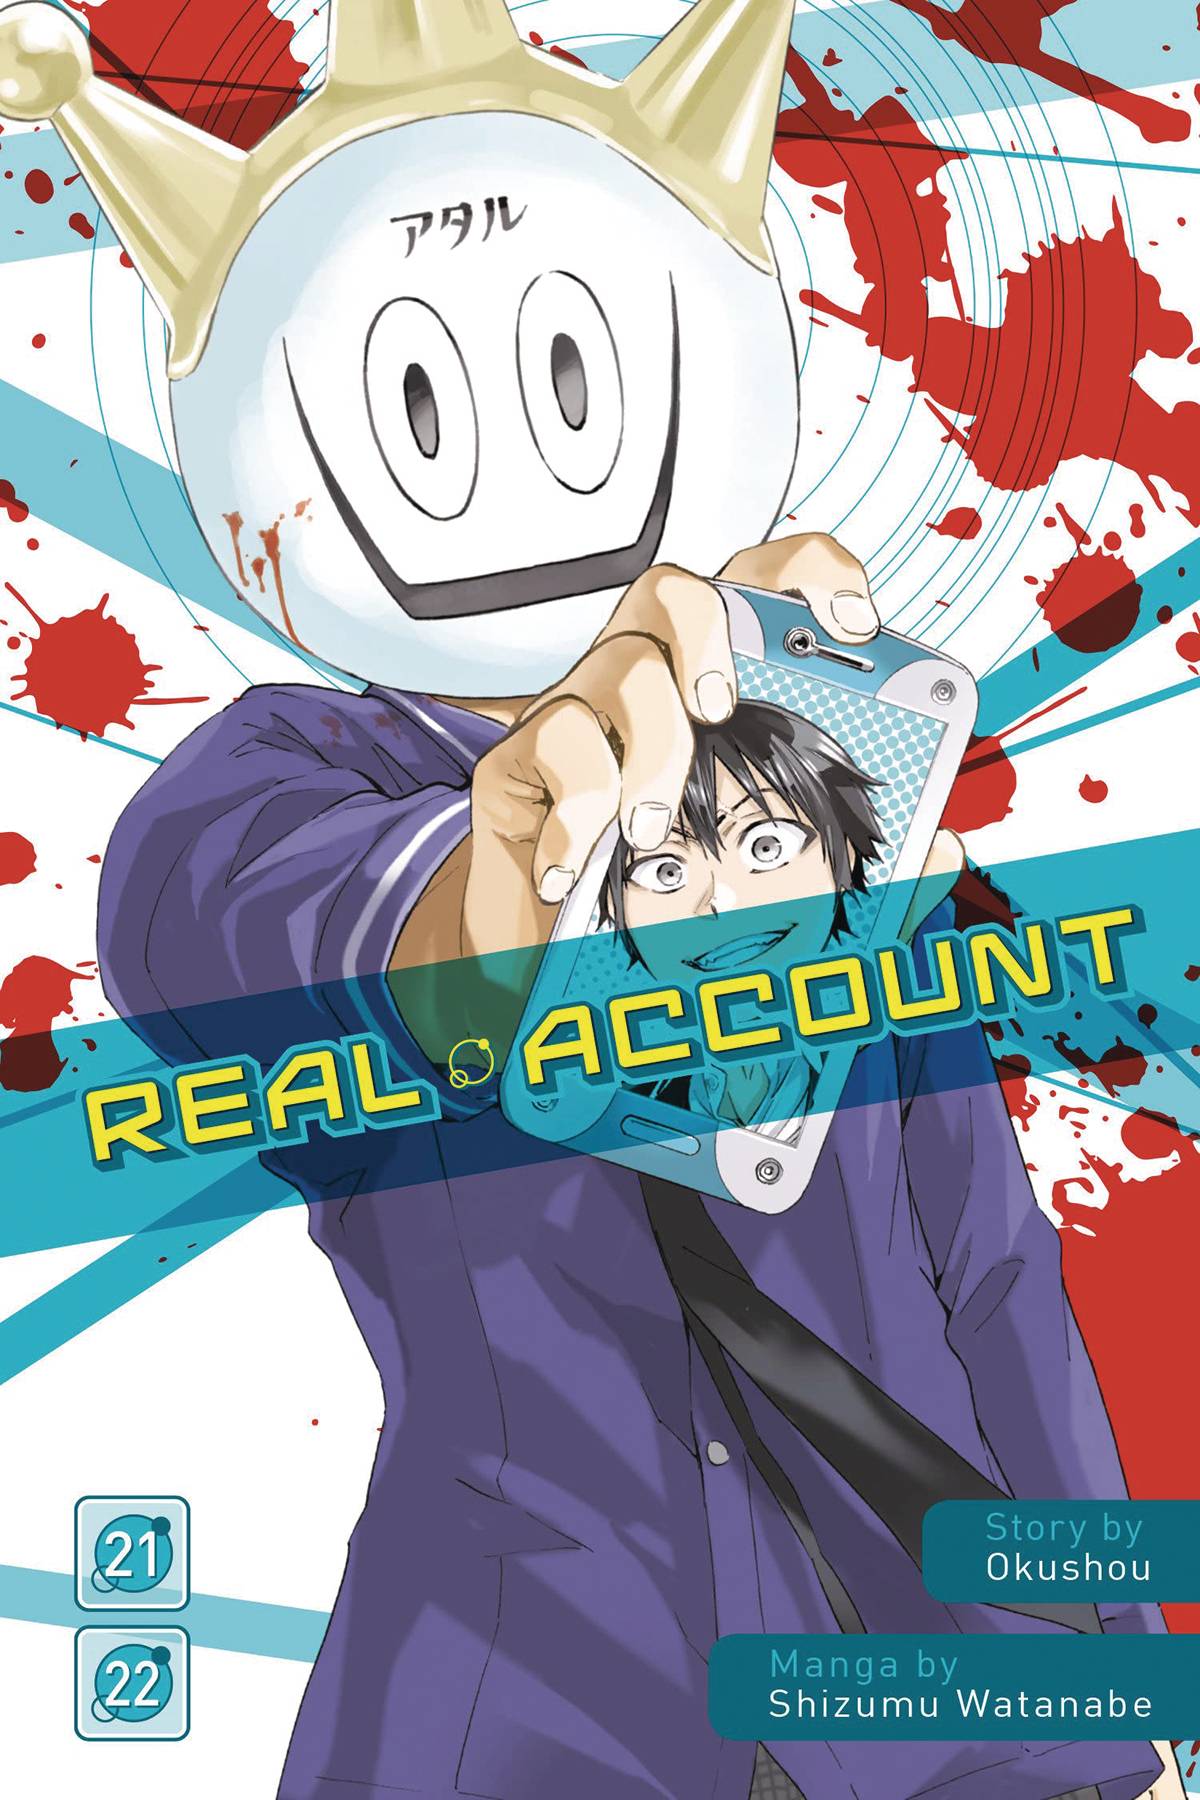 REAL ACCOUNT GN 21 - 22 OMNIBUS (MR)